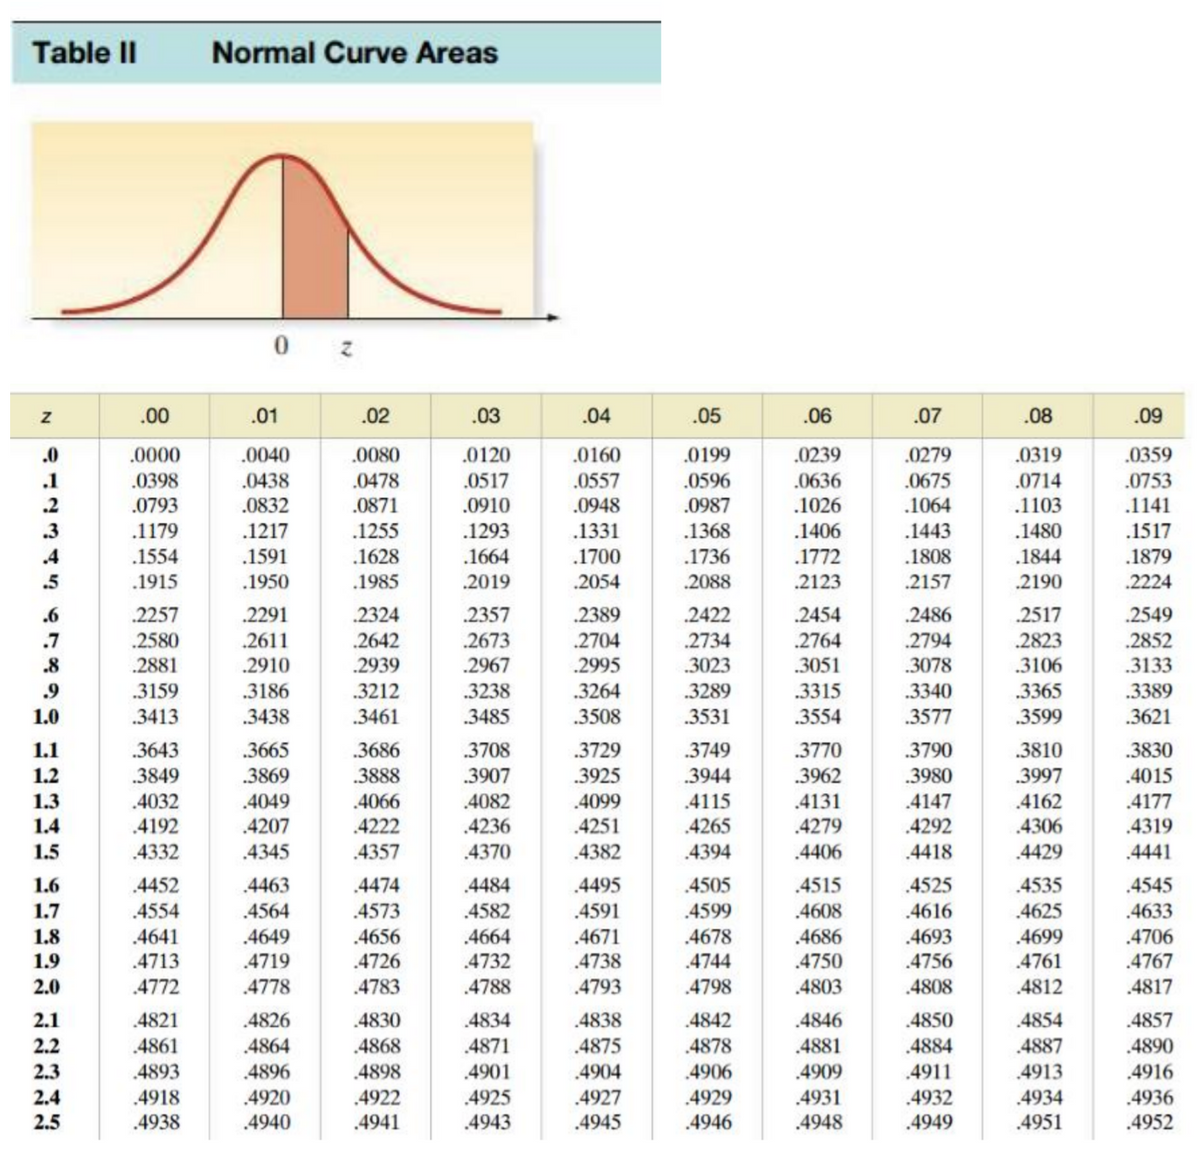 Table II
Normal Curve Areas
.00
.01
.02
.03
.04
.05
.06
.07
.08
.09
.0
.0000
.0040
.0080
.0120
.0160
.0199
.0239
.0279
.0319
.0359
.0478
.0871
.0596
.0987
.0438
.0517
.0910
.1293
.0675
.1064
.0714
.1103
.1480
.1
.0398
.0557
.0636
.0753
.2
.0793
.0832
.0948
.1026
.1141
.3
.1179
.1217
.1255
.1331
.1368
.1406
.1443
.1517
.1844
.2190
.4
.1554
.1591
.1628
.1664
.1700
.1736
.1772
.1808
.1879
.5
.1915
.1950
.1985
.2019
.2054
.2088
.2123
.2157
.2224
.6
.2257
.2291
.2324
.2357
.2389
.2422
.2454
.2486
.2517
.2549
.2794
.3078
.2580
.2673
.2967
.7
.2611
.2642
.2704
.2734
.2764
.2823
.2852
.3051
.3315
.8
.2881
.2910
.2939
.2995
3023
.3106
.3133
.3340
.3577
.3264
3289
.3365
.3599
.9
.3159
.3186
.3212
.3238
.3389
1.0
.3413
.3438
.3461
.3485
.3508
.3531
.3554
.3621
1.1
.3643
.3665
.3686
.3708
.3729
.3749
.3770
.3790
.3810
.3830
.3849
.4032
.4192
1.2
.3869
.3888
.3907
3925
.3944
.3962
.3980
.3997
.4015
4162
.4306
1.3
.4049
.4066
.4082
.4099
.4115
.4131
.4147
.4177
.4222
.4357
1.4
.4207
.4236
.4251
.4265
.4279
.4292
.4319
1.5
4332
.4345
.4370
.4382
.4394
.4406
4418
4429
.4441
1.6
.4452
.4463
.4474
.4484
.4495
.4505
.4515
4525
4535
.4545
1.7
.4554
.4564
.4573
.4582
.4591
.4599
.4608
.4616
.4625
.4633
.4678
.4744
1.8
.4641
.4671
.4738
.4649
.4656
.4664
.4686
.4693
.4699
.4706
1.9
.4713
.4719
.4726
.4732
.4750
.4756
4761
.4767
2.0
.4772
.4778
.4783
.4788
.4793
4798
.4803
.4808
.4812
.4817
2.1
.4821
.4826
.4830
.4834
.4838
.4842
.4846
.4850
.4854
.4857
.4864
.4896
2.2
.4861
.4868
4871
.4875
.4878
.4881
.4884
.4887
.4890
.4904
.4927
2.3
.4893
.4898
.4901
.4906
.4909
.4911
.4913
.4916
.4925
.4943
.4932
.4949
2.4
.4918
.4920
.4922
4929
.4931
.4934
.4936
2.5
.4938
.4940
.4941
.4945
.4946
.4948
.4951
.4952
